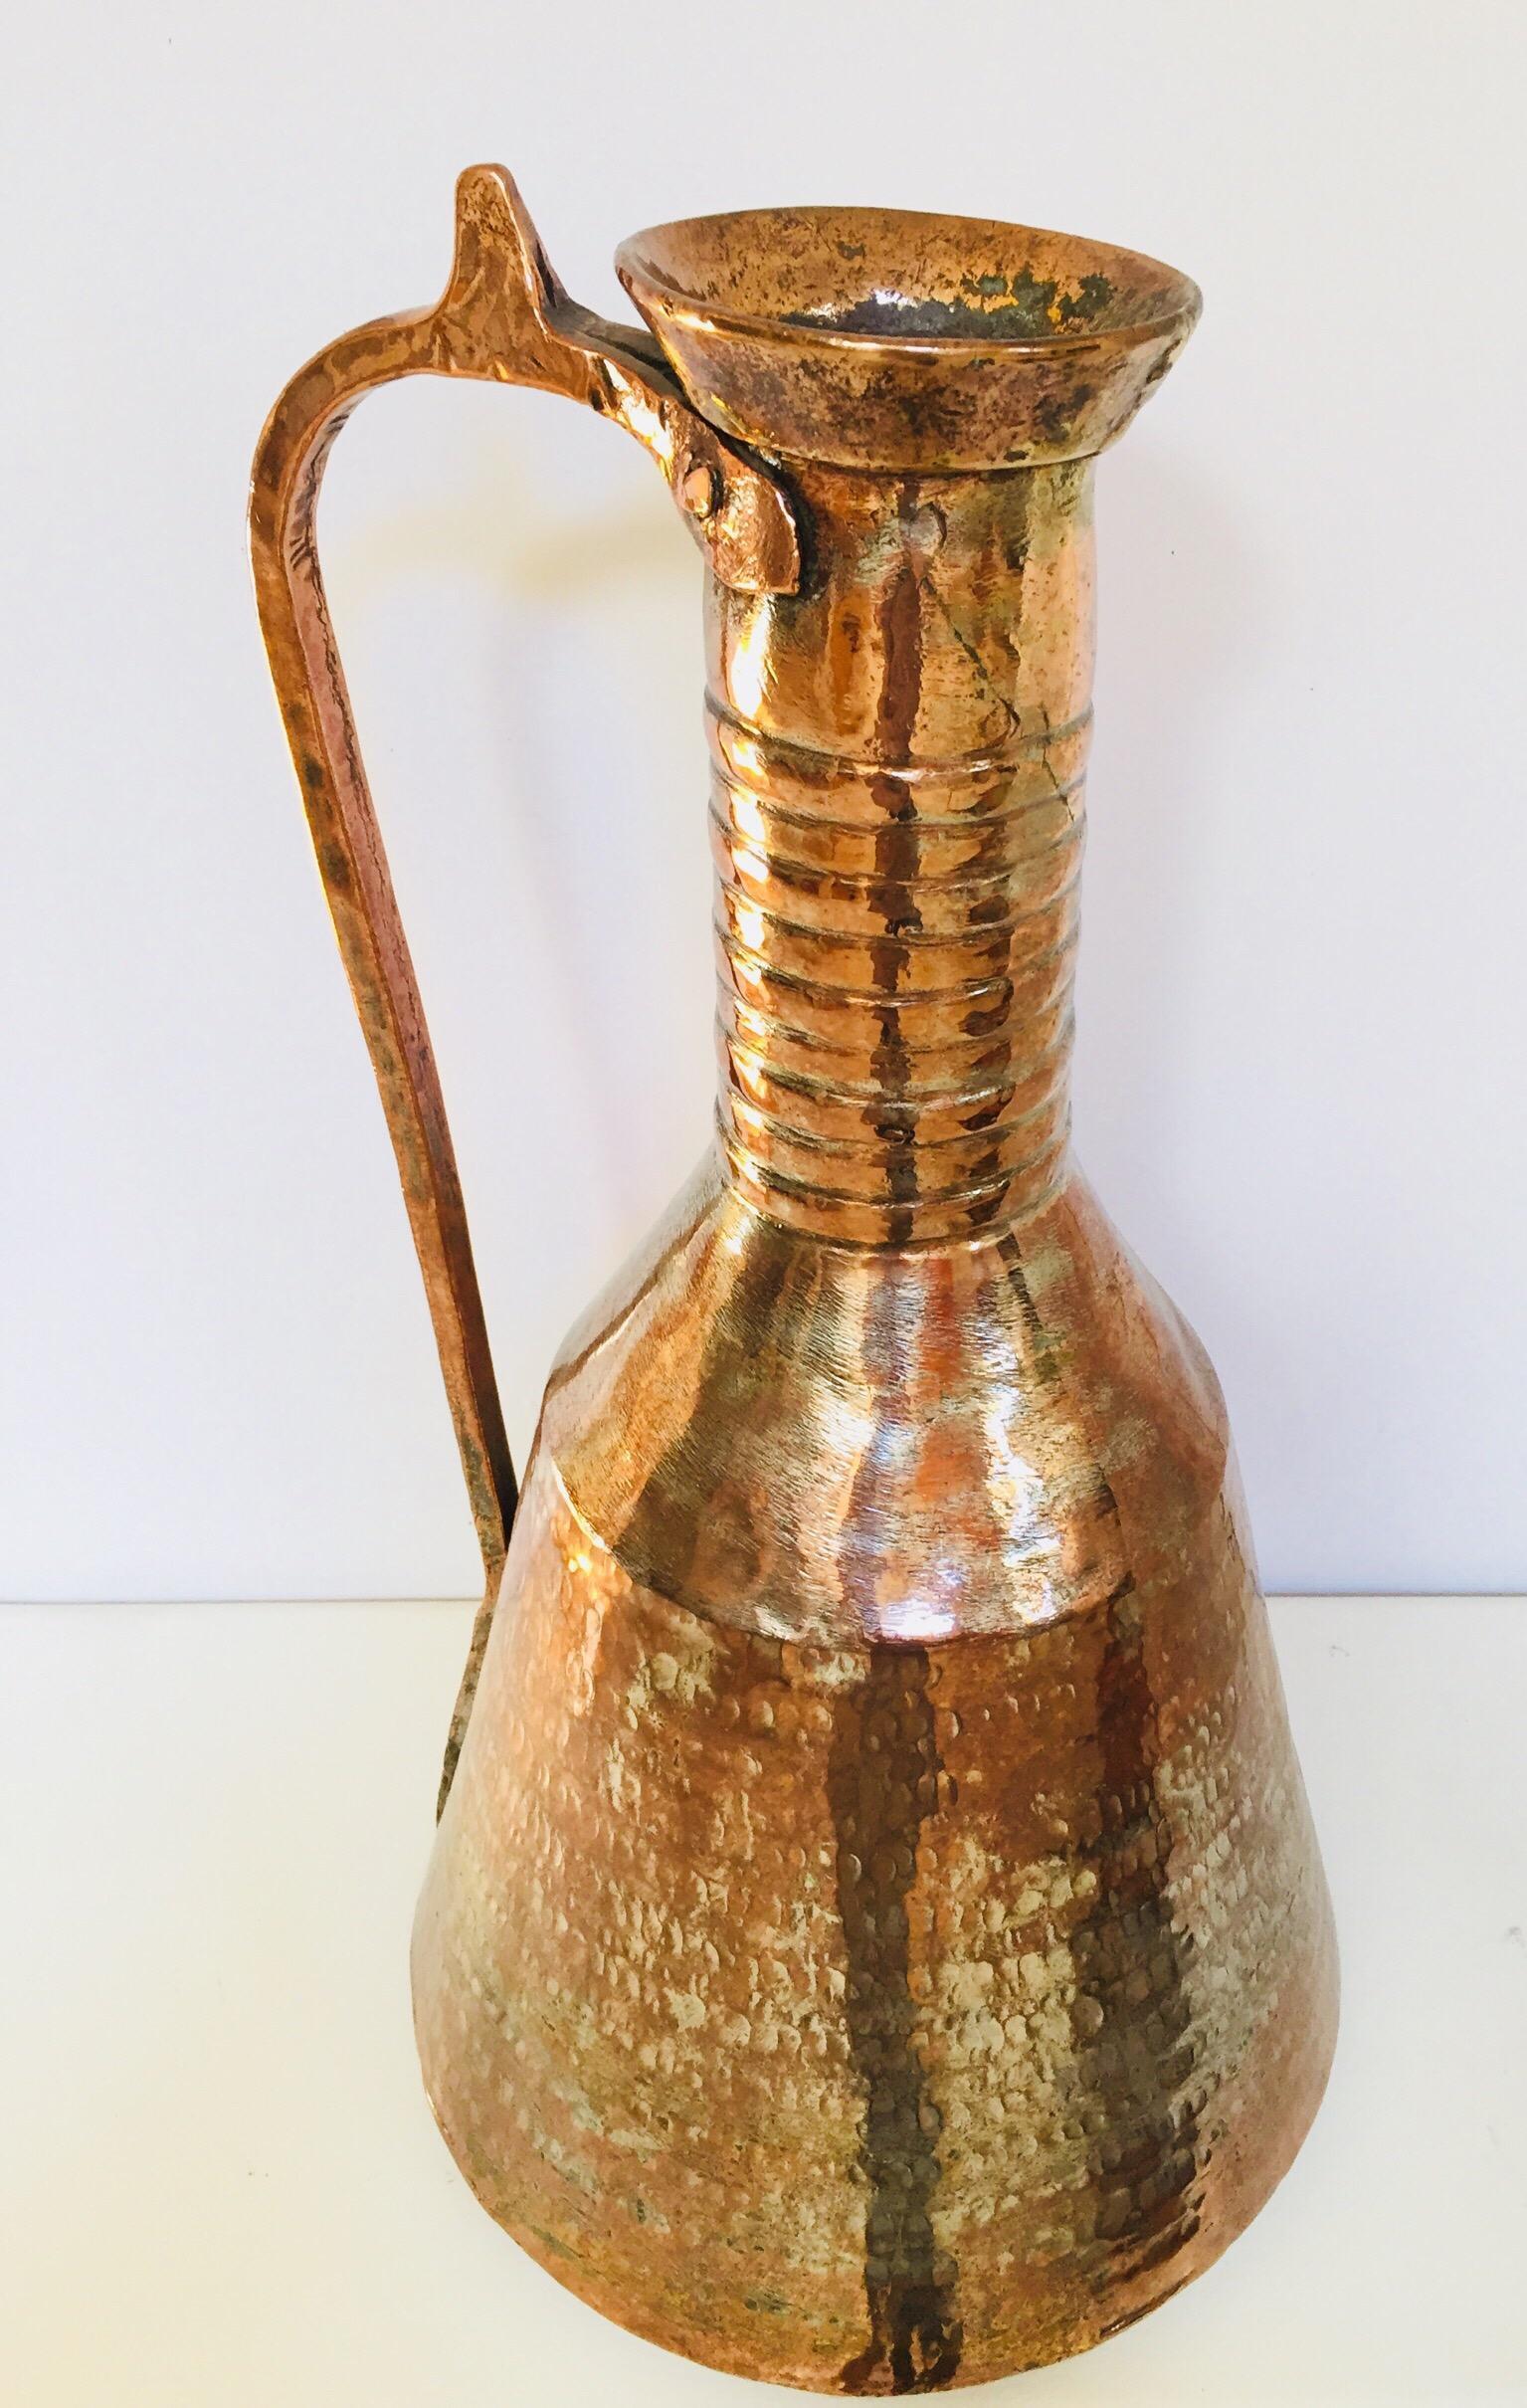 19th century Middle Eastern Persian tinned copper water jar with handle.
Moorish Arabic water ewer, hand tooled, hand-hammered heavy metal tinned copper vessel with brass handle.
Middle Eastern Asian traditional water vessel with riveted brass